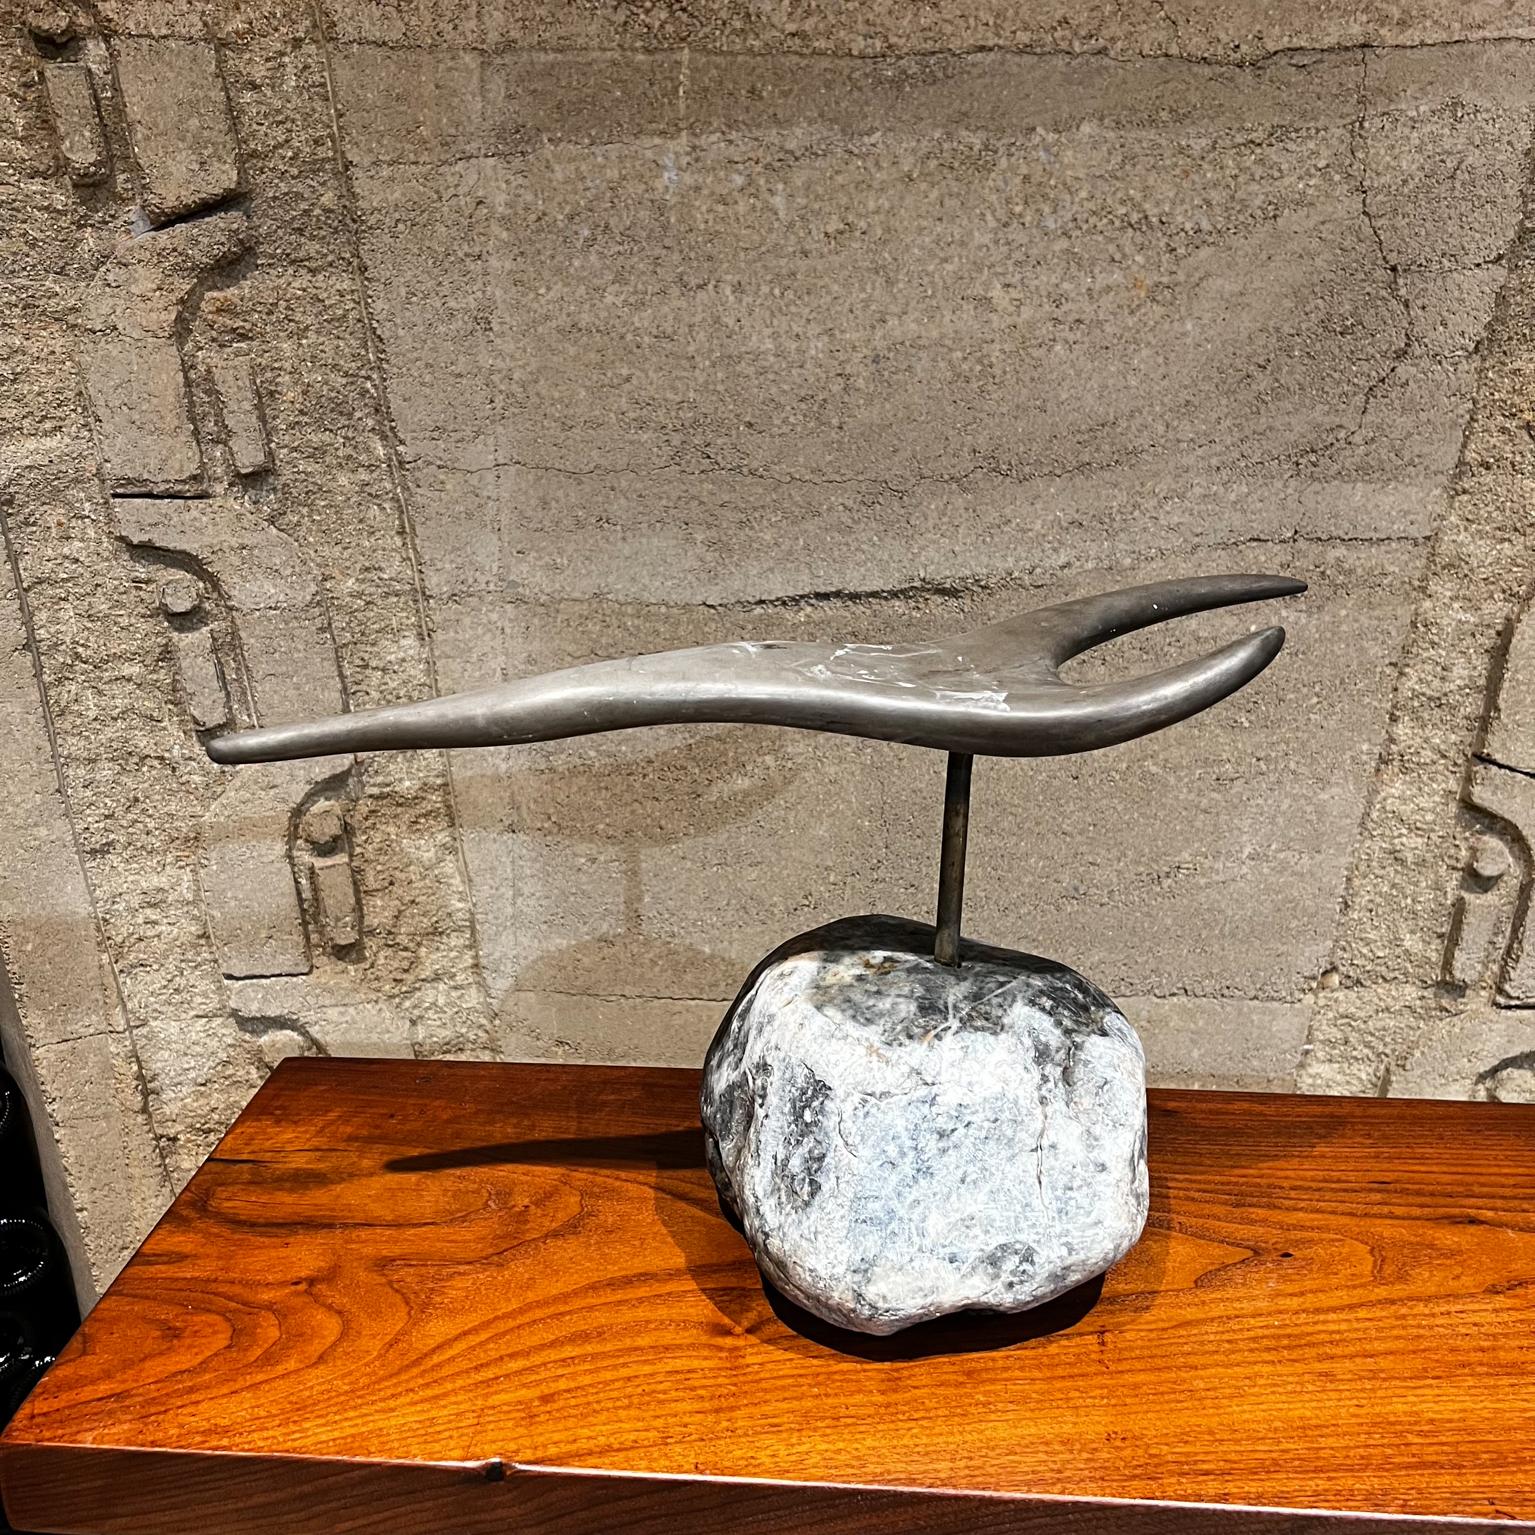 1970s Modernist bronze and stone abstract table sculpture
Organic Modern form.
Stone base- rock mount.
Vintage patina. 
No signature present from the maker.
11.75 tall x 7.75 w x 21.25 long
Preowned condition original vintage